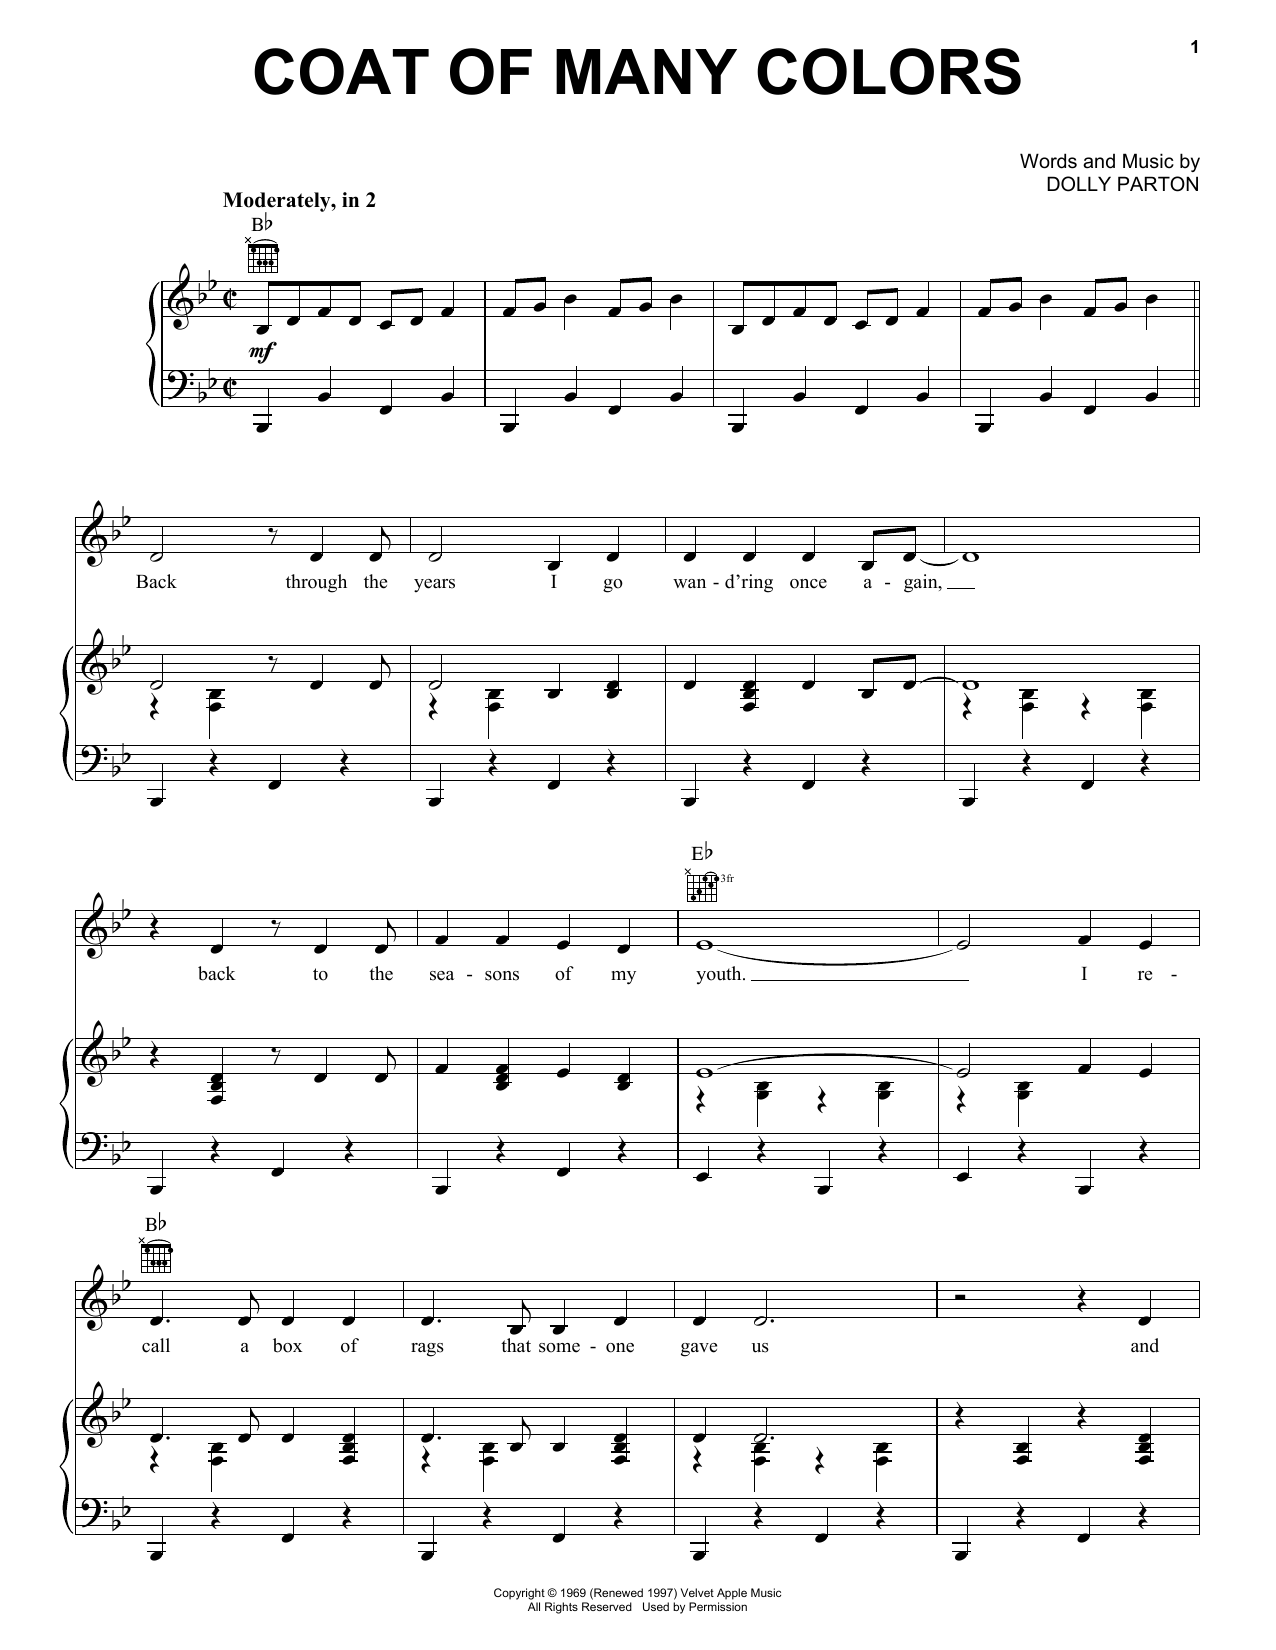 Download Dolly Parton Coat Of Many Colors Sheet Music